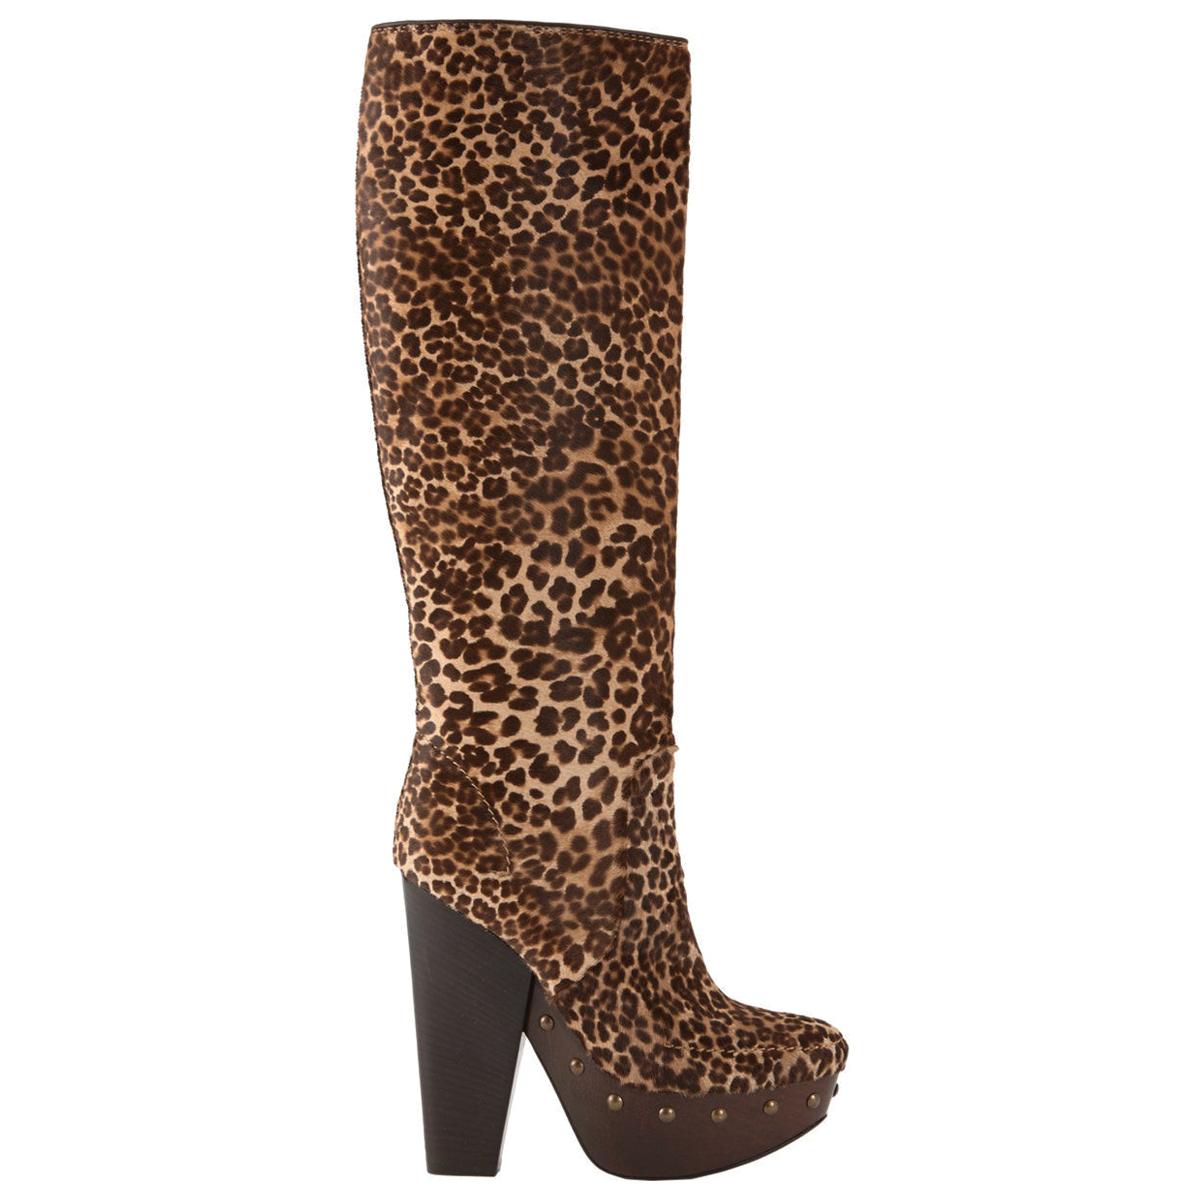 New  LANVIN Leopard Print  Hair-Calf Studded Platform Boots 37.5 and 38.5 For Sale